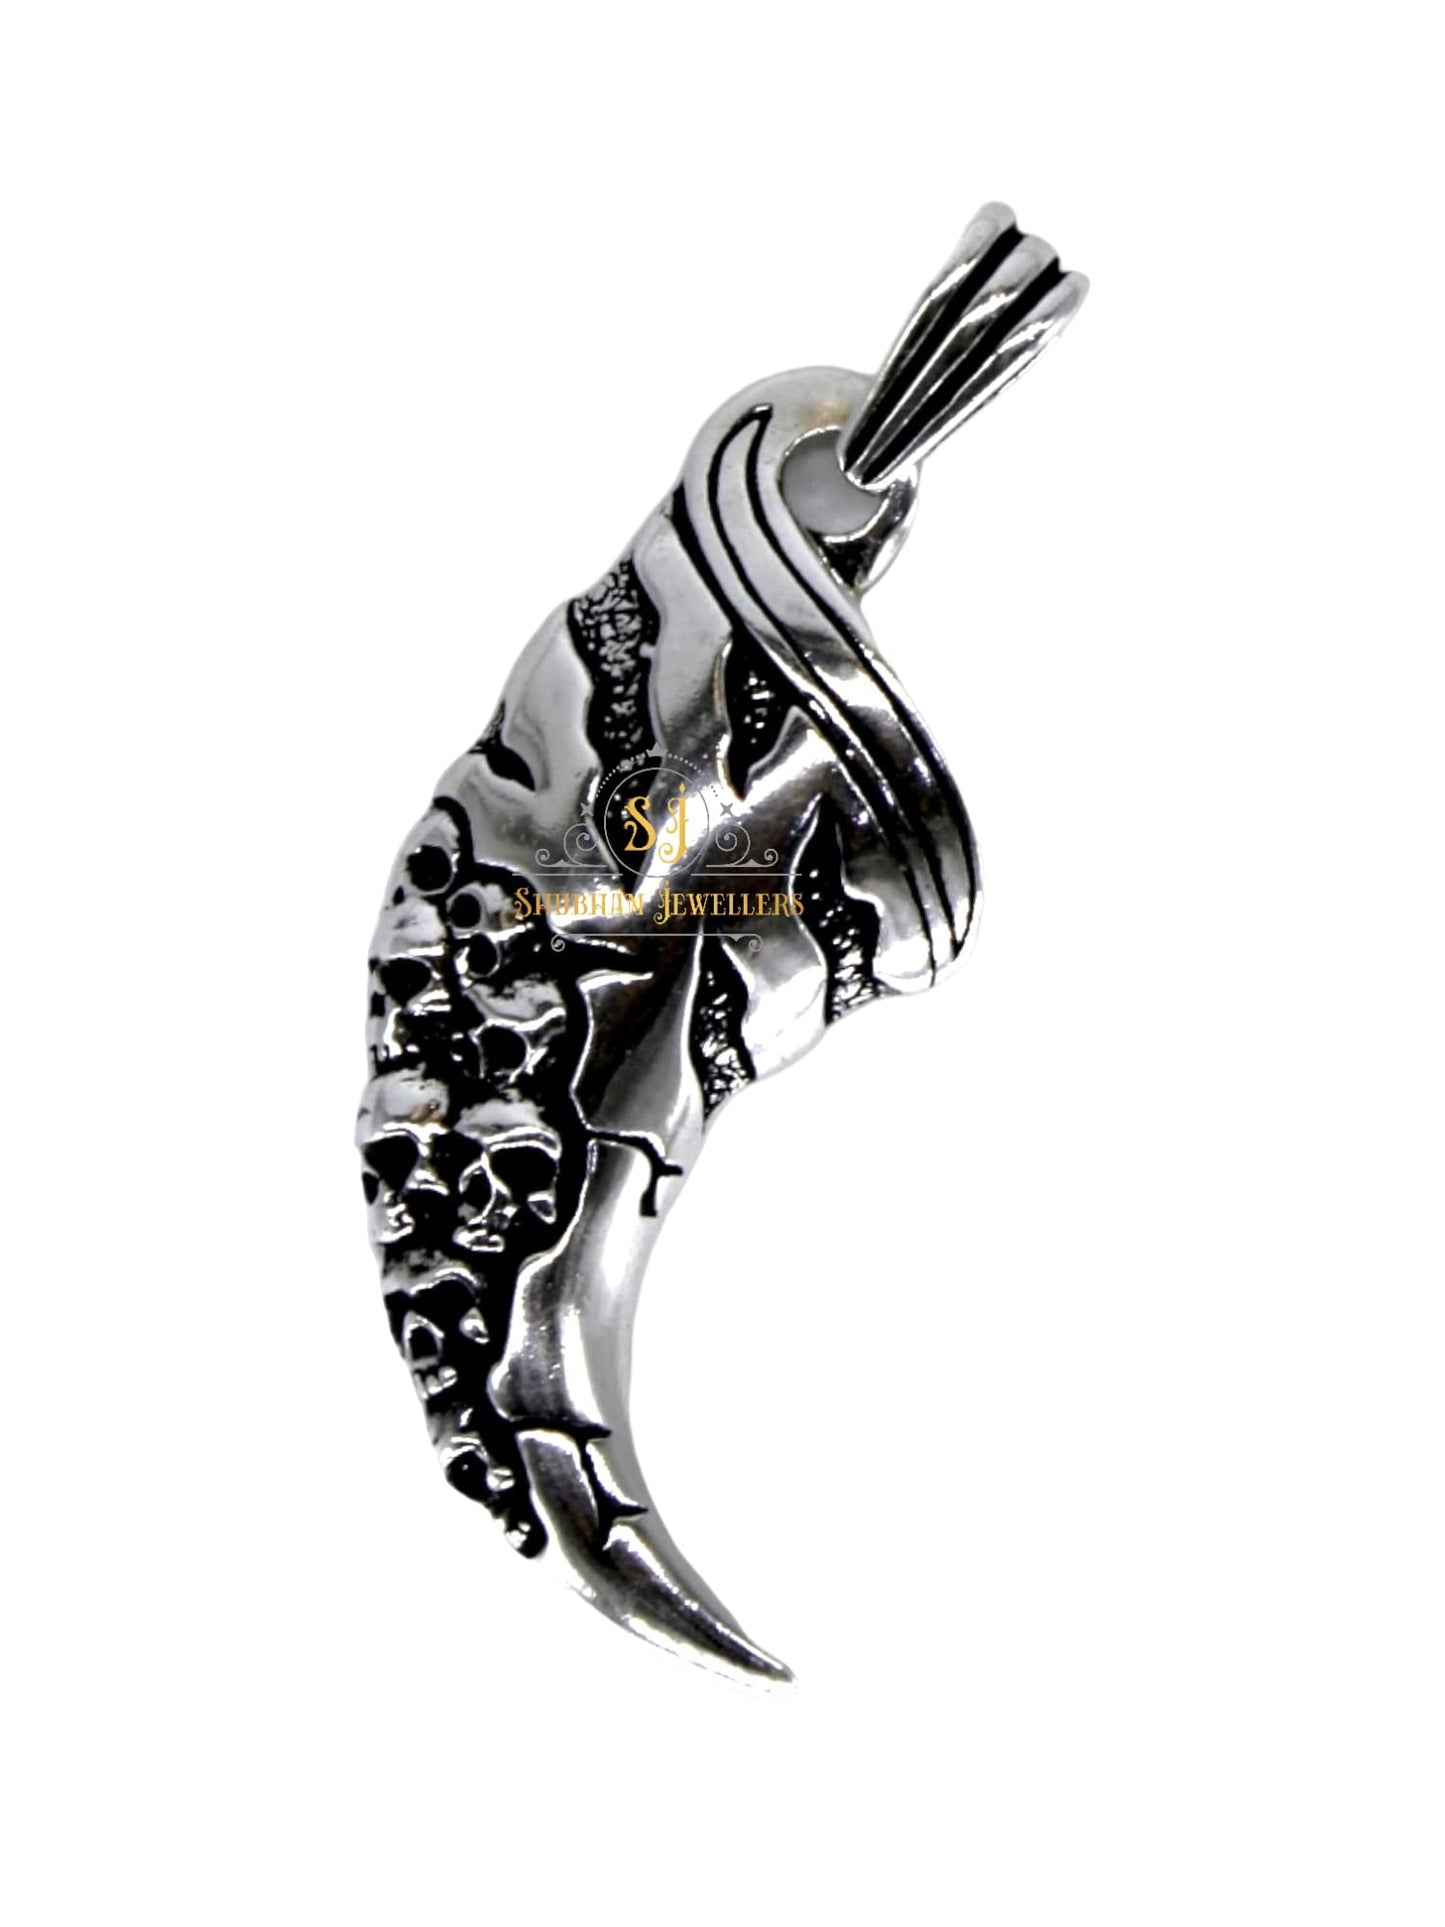 SJ SHUBHAM JEWELLERS™ Dragon Claw Anchor Lion King Pattern, Silver Pendant, Ethically Handcrafted With Care Multiple Choice - JewelYaari By Shubham Jewellers